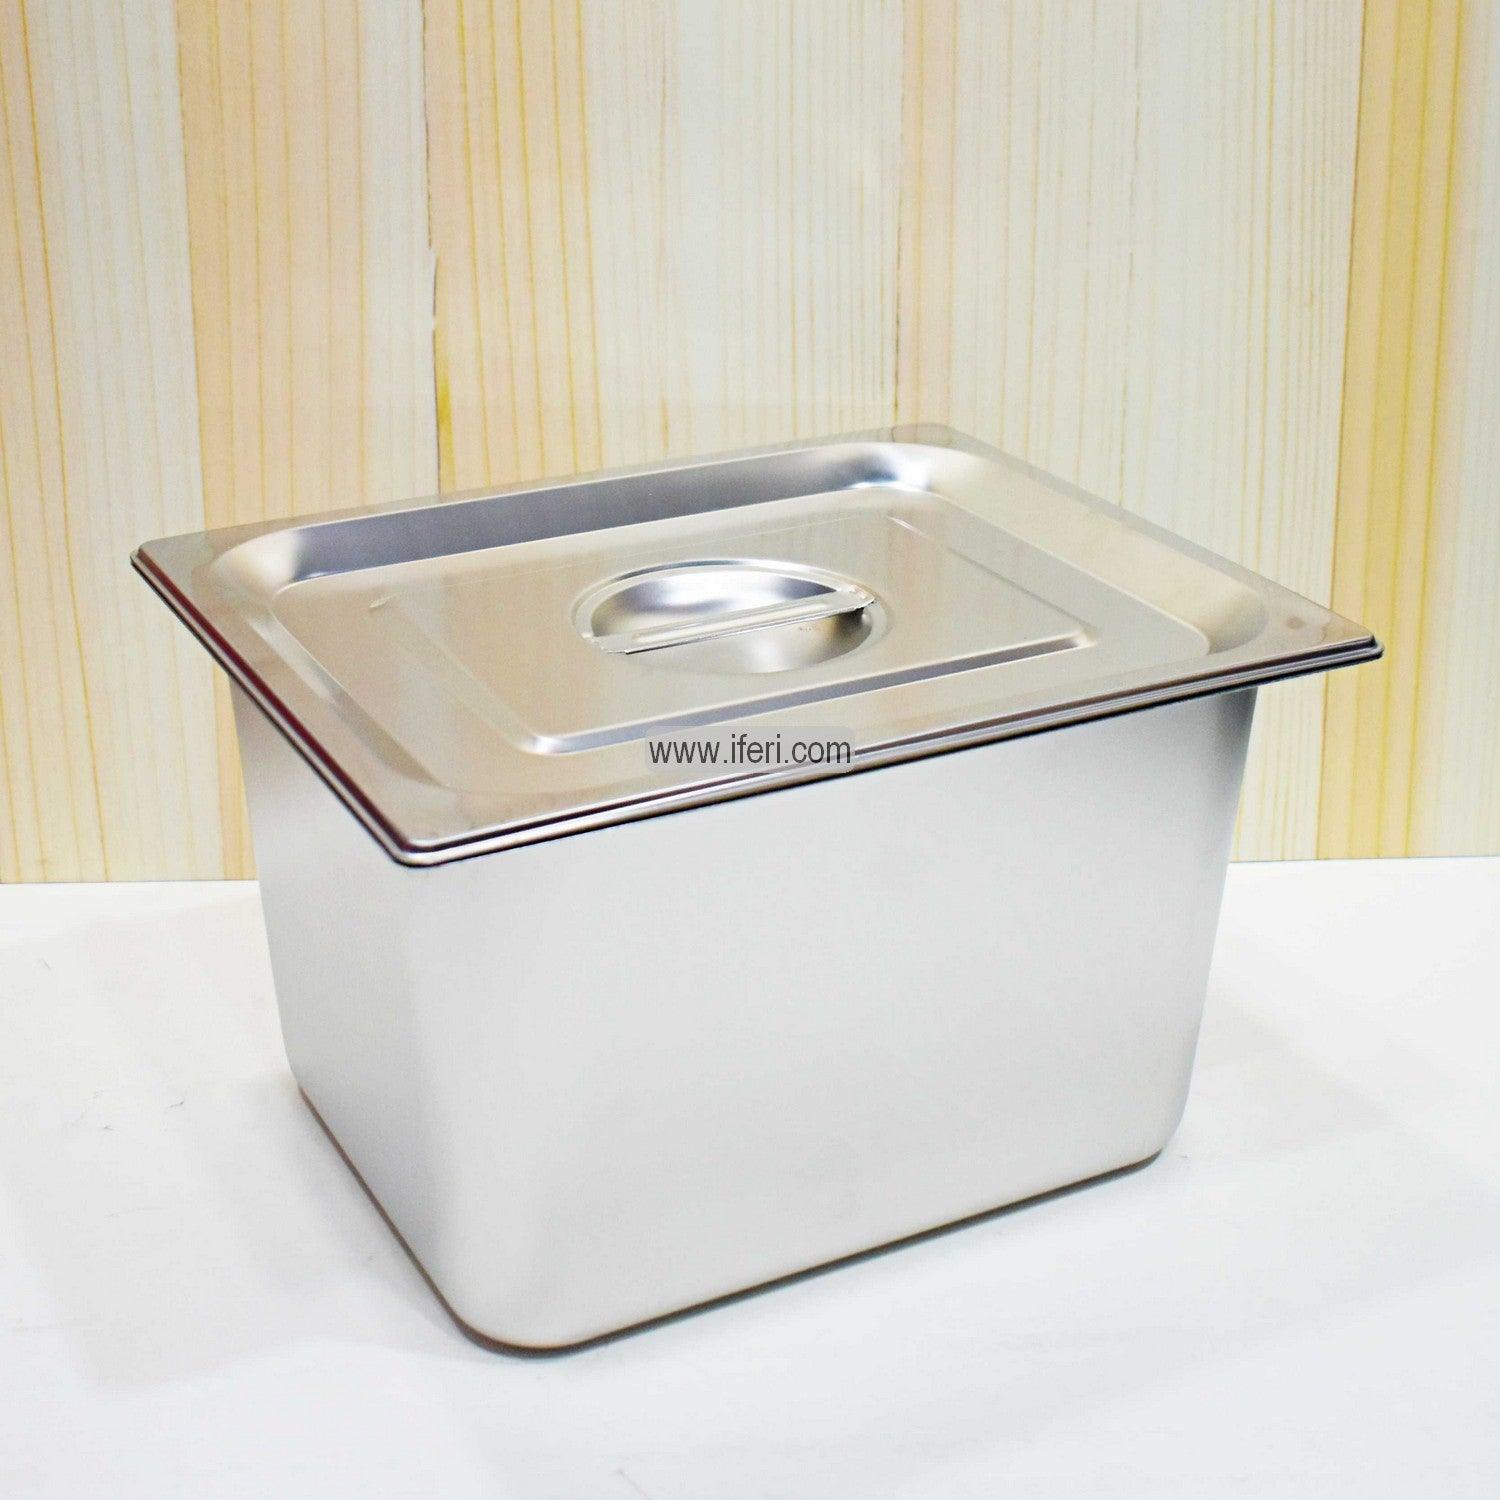 12.8 Inch Stainless Steel Food Pan with Lid SN0586 Price in Bangladesh - iferi.com